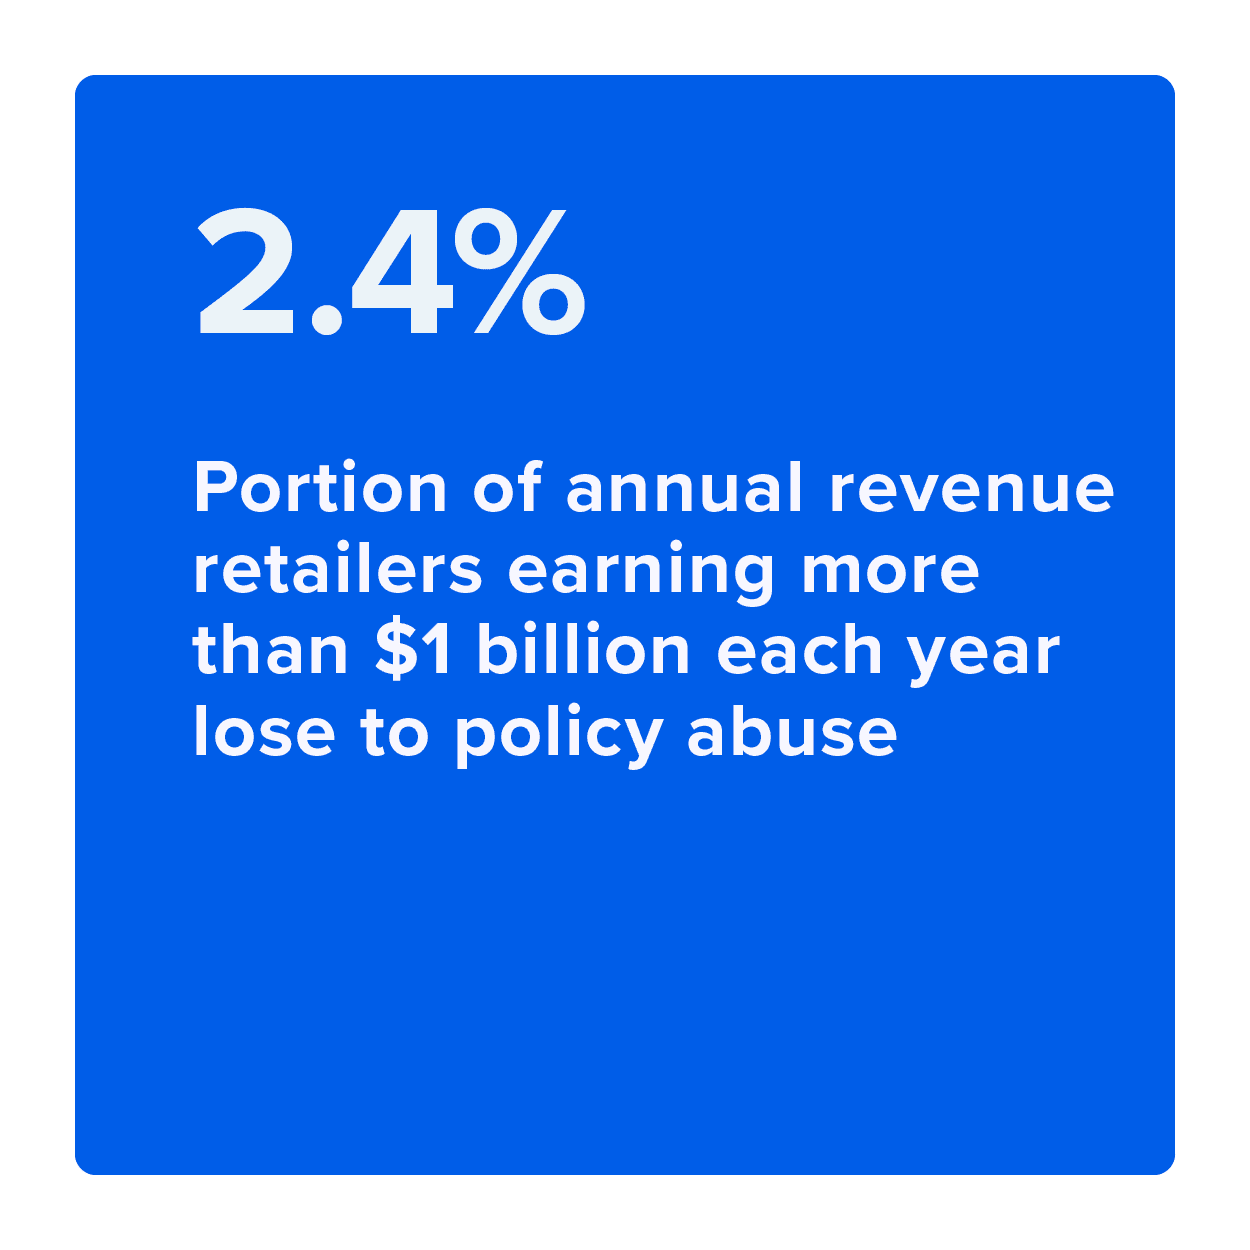 Portion of annual revenue lost to policy abuse each year